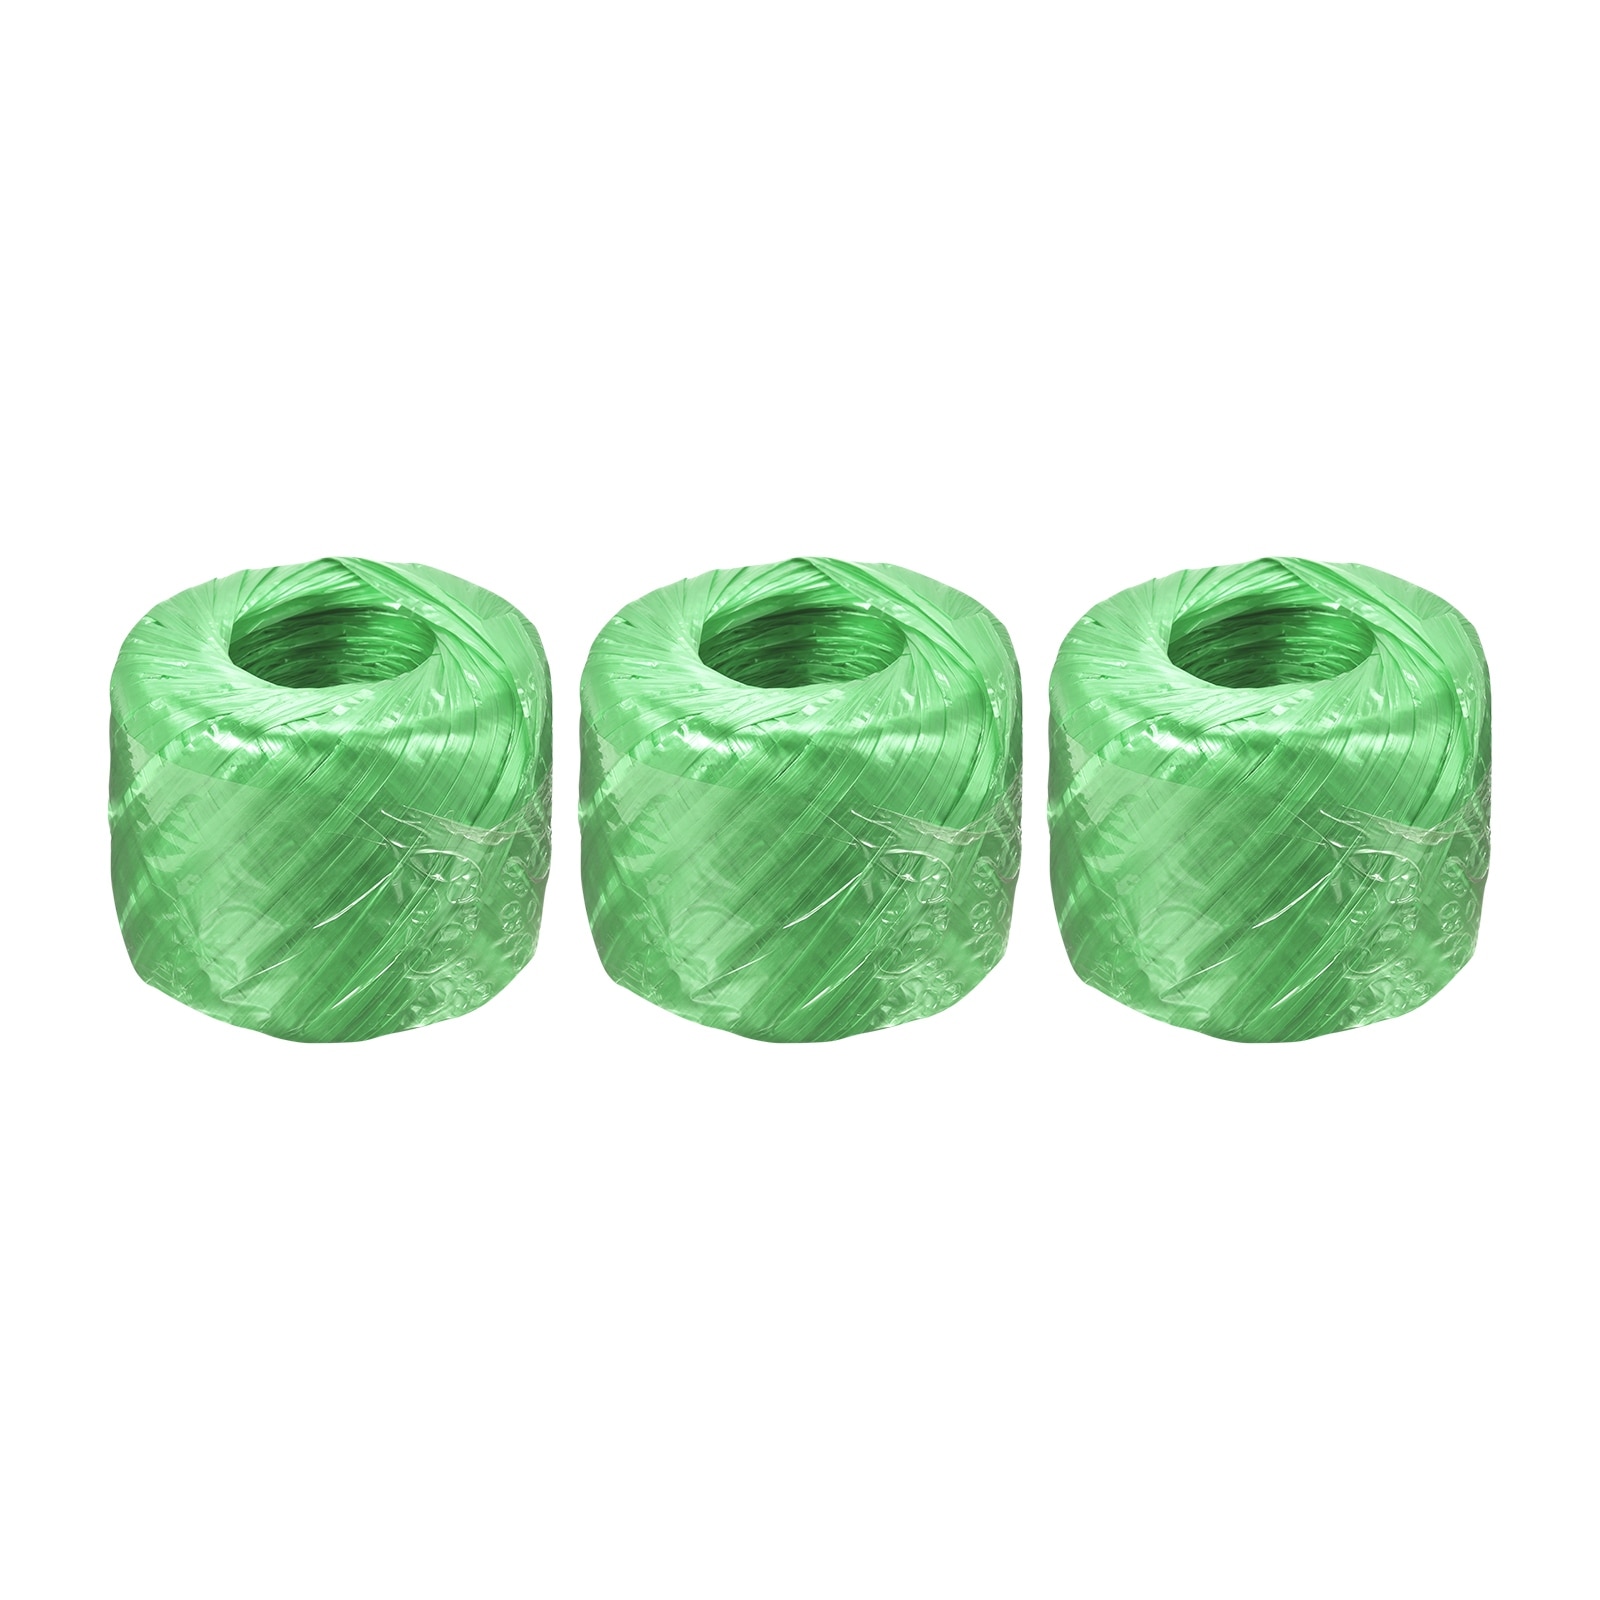 Polyester Nylon Plastic Rope Twine Bundled for Packing ,100m Green 3Pcs -  Bed Bath & Beyond - 36680661